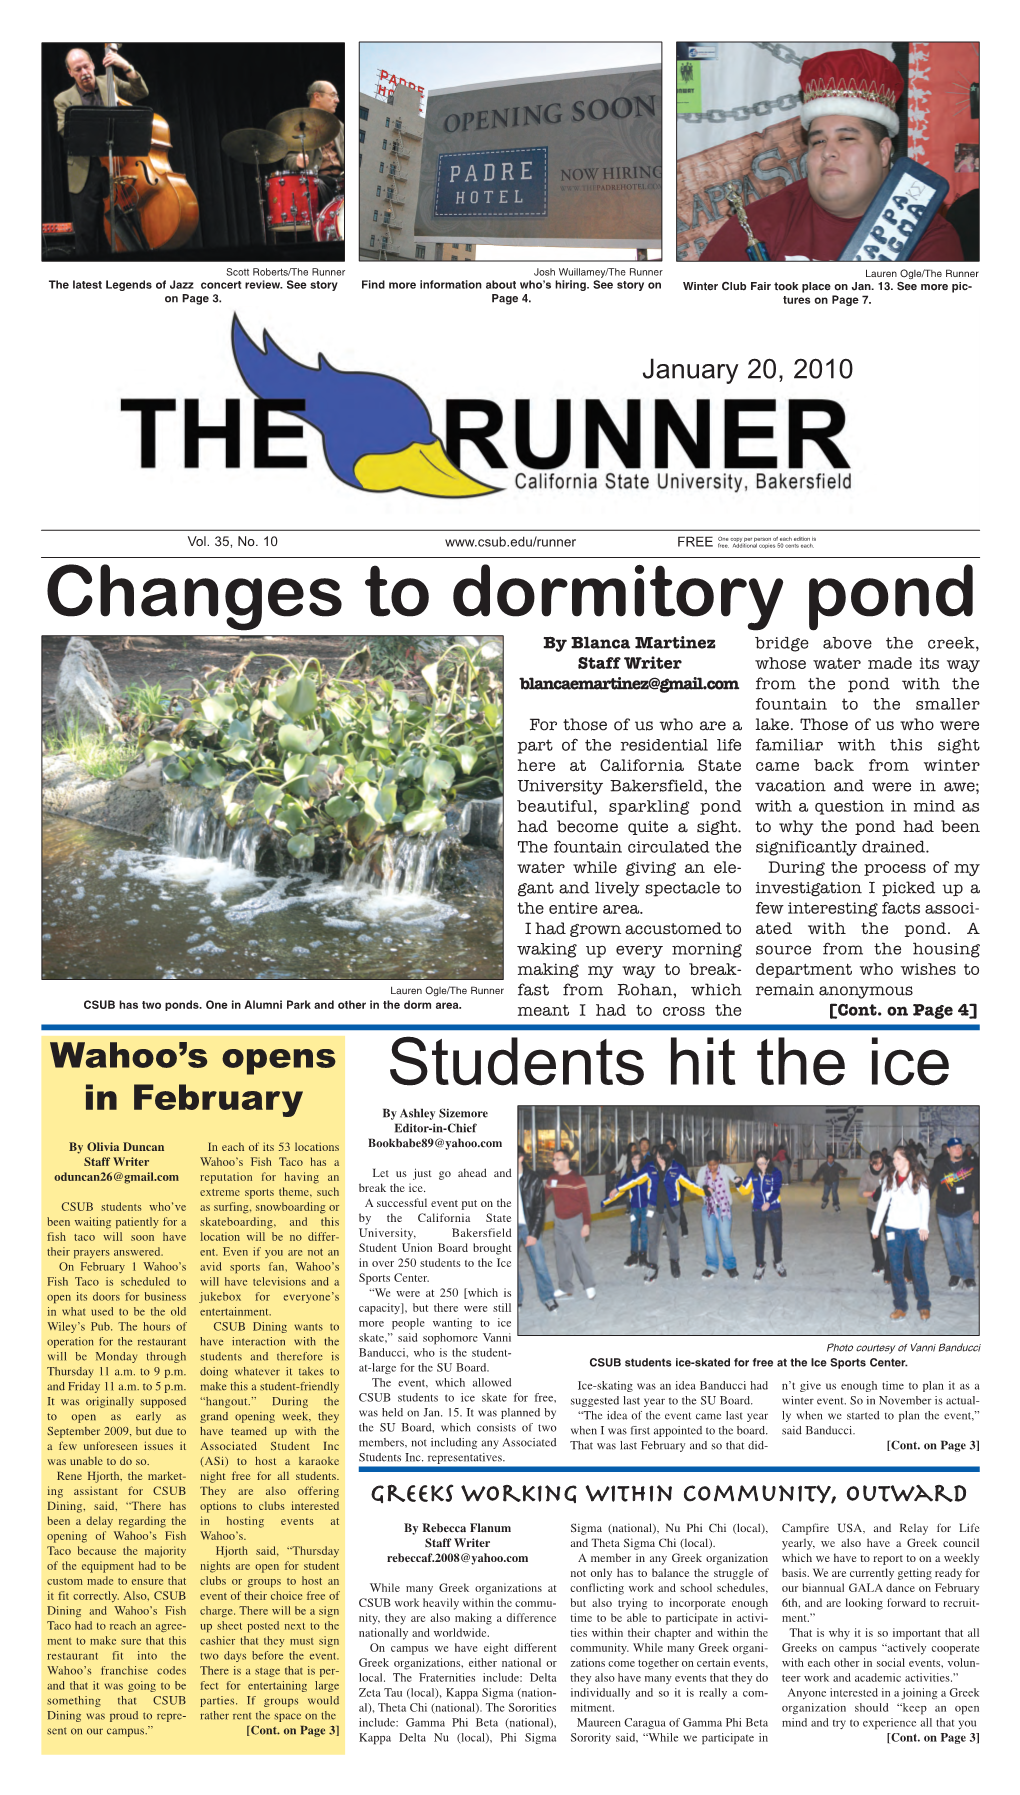 Changes to Dormitory Pond